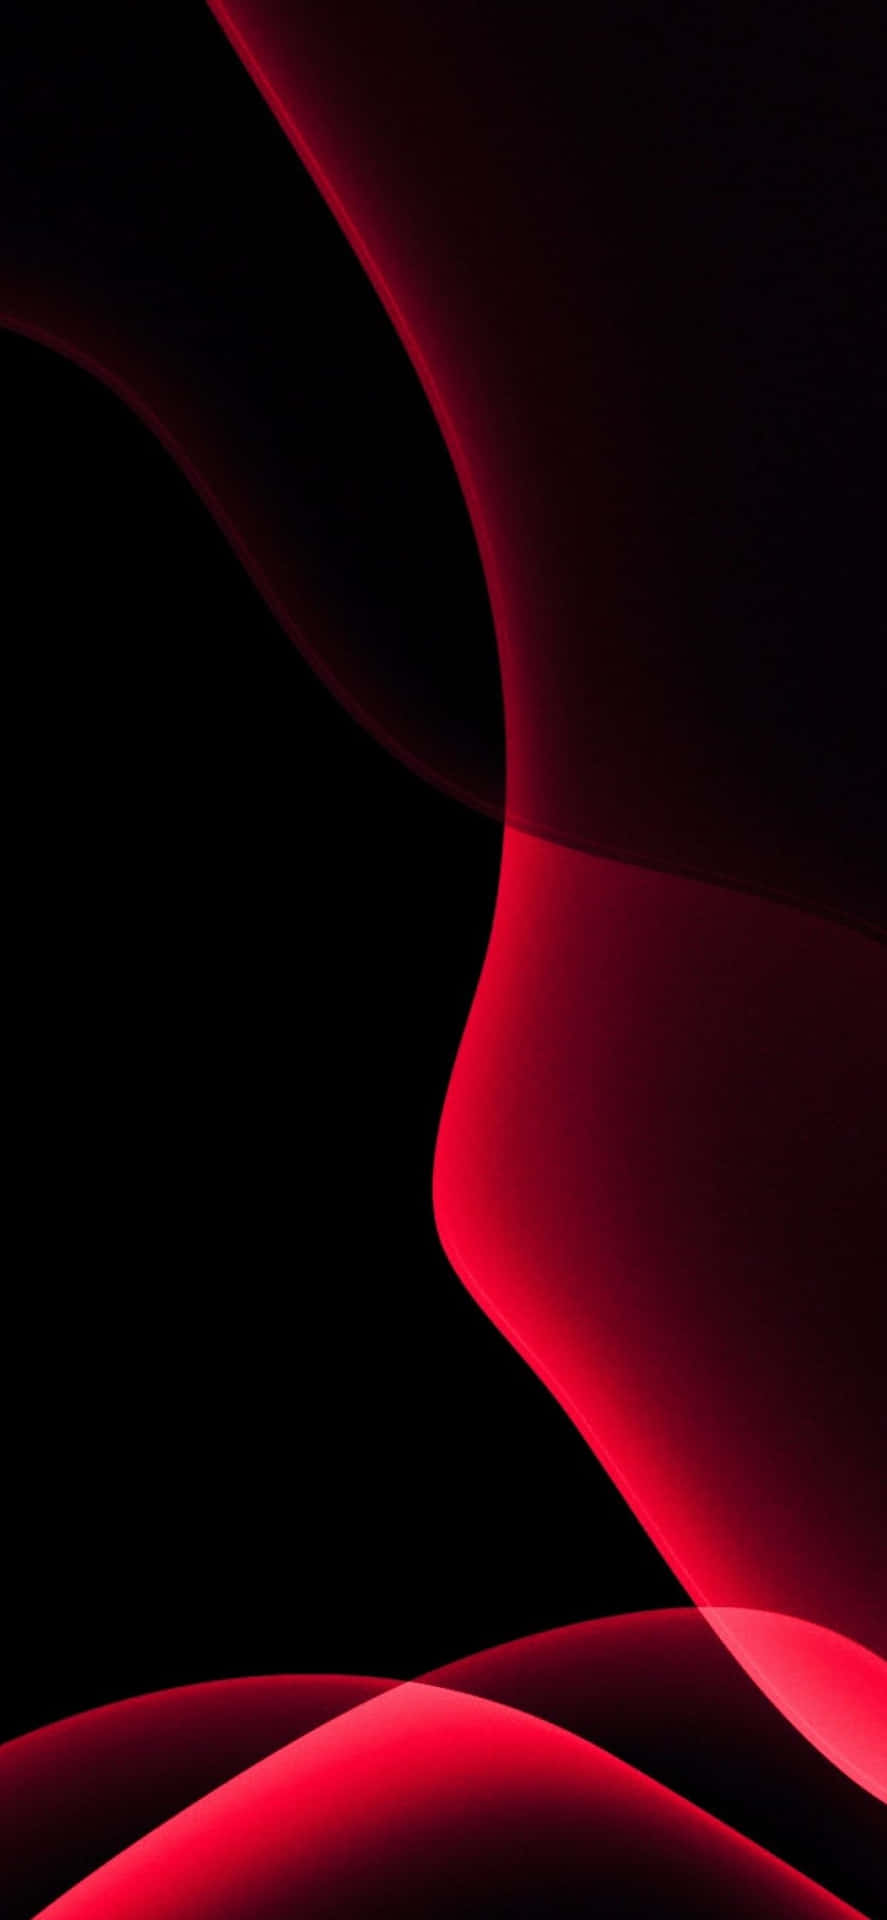 Download IPhones XS Max Abstract Red